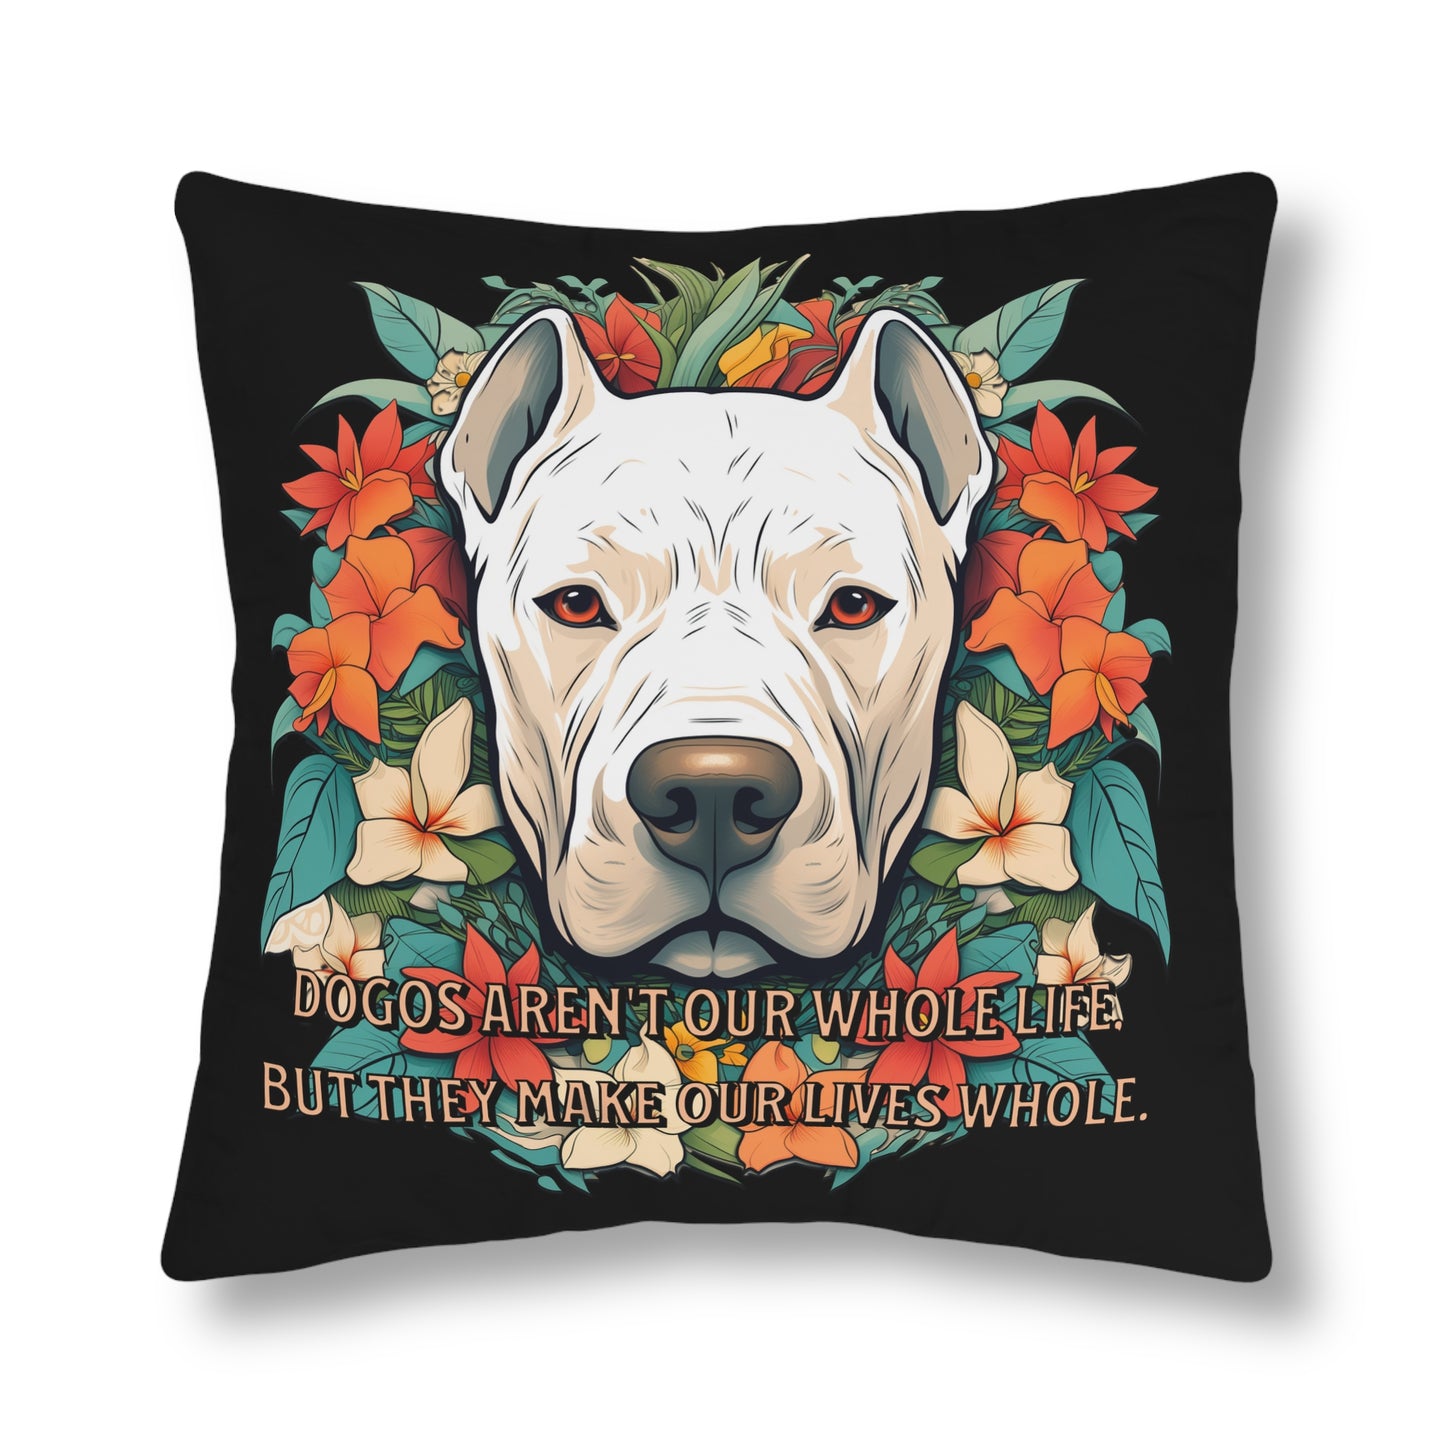 Dogo Tropical Waterproof Pillows